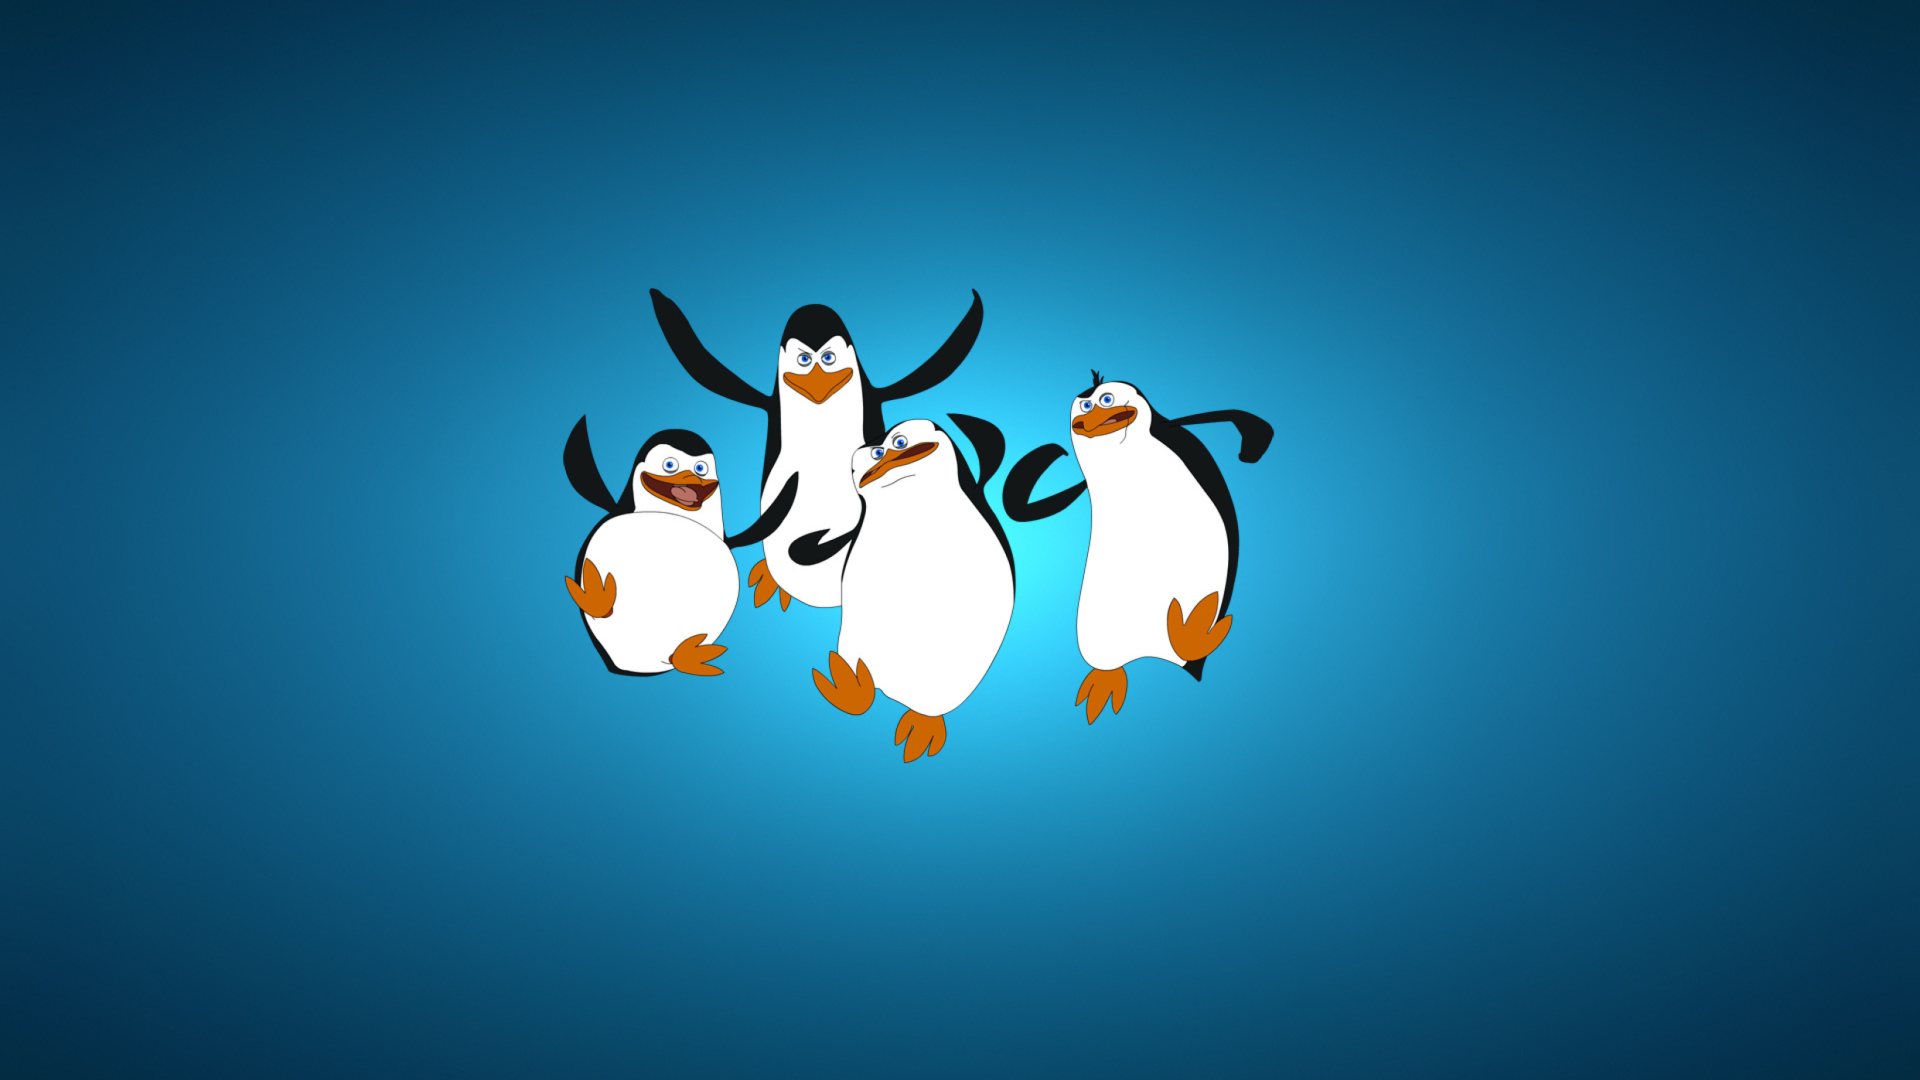 The Penguins Of Madagascar wallpaper 1920x1080